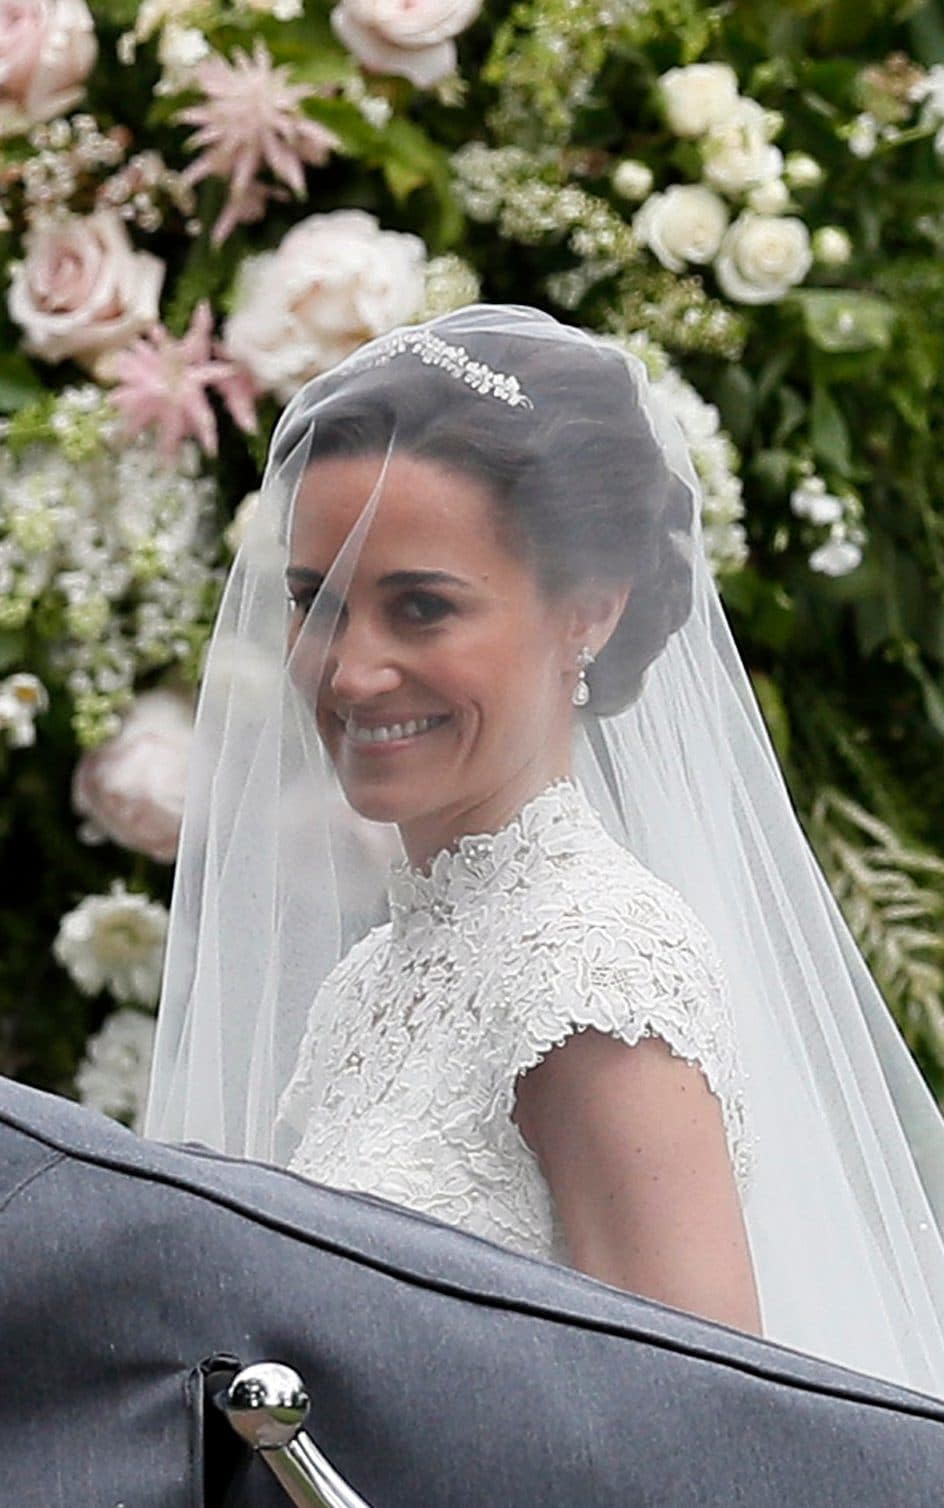 Pippa Middleton arrives at St Mark's Church in Englefield, wearing the diamond Robinson Pelham earrings commissioned for her sister the Duchess of Cambridge's wedding in 2011  - AP POOL